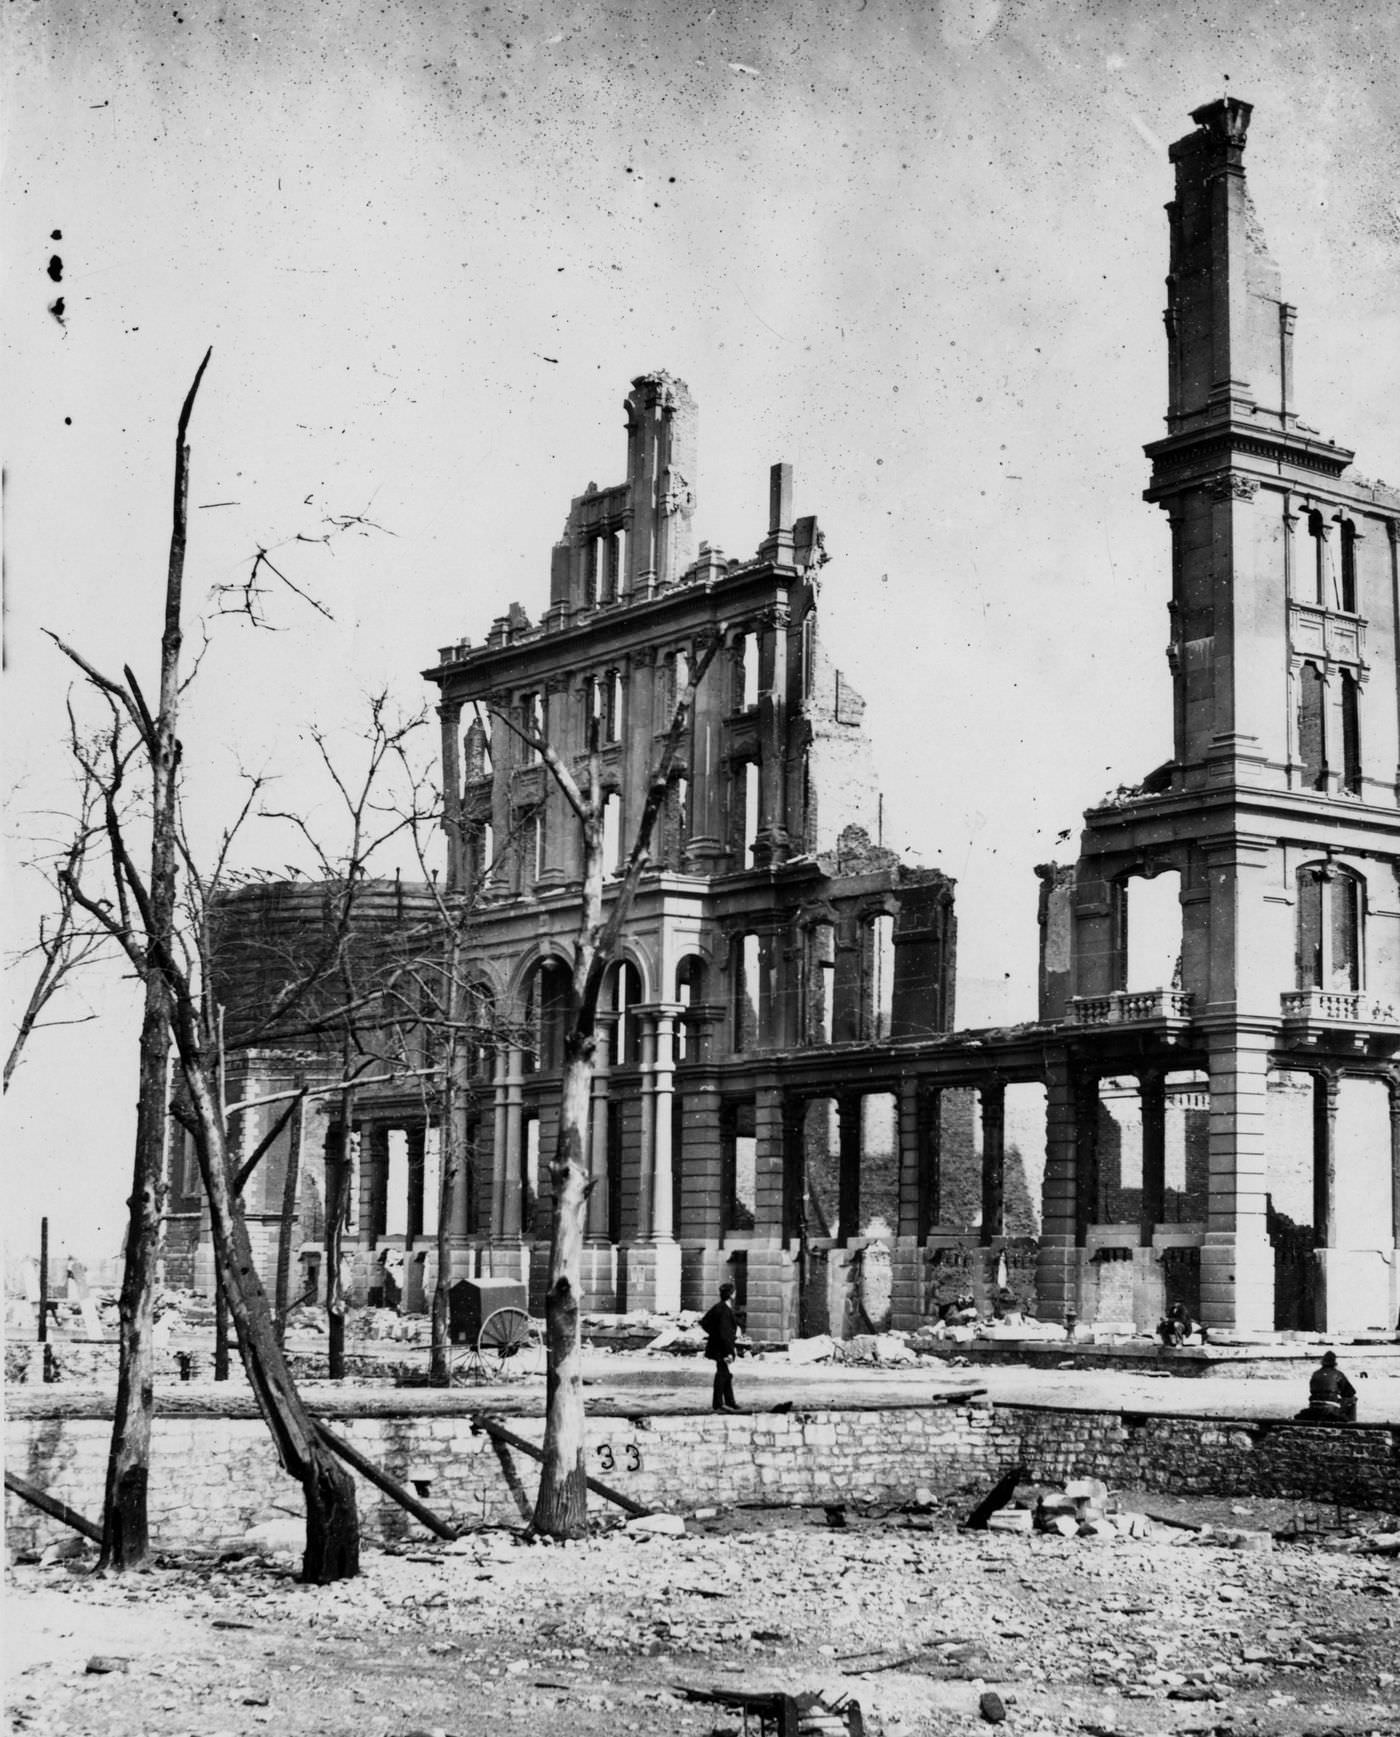 The ruins of the Grand Pacific Hotel after the Great Chicago Fire of 1871.